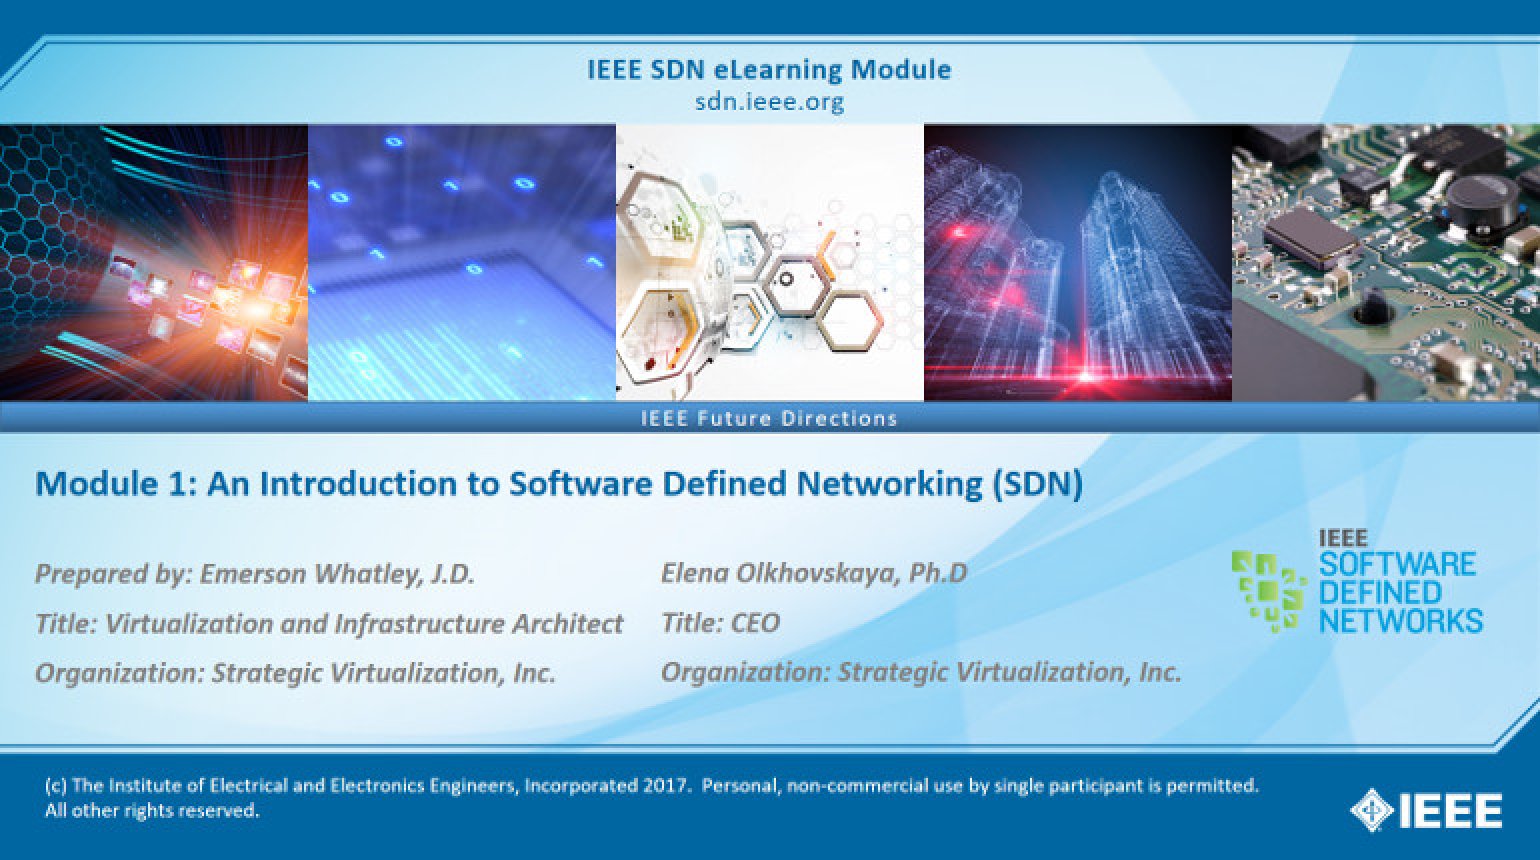 ONOS Module 1: An Introduction to Software Defined Networking (SDN)